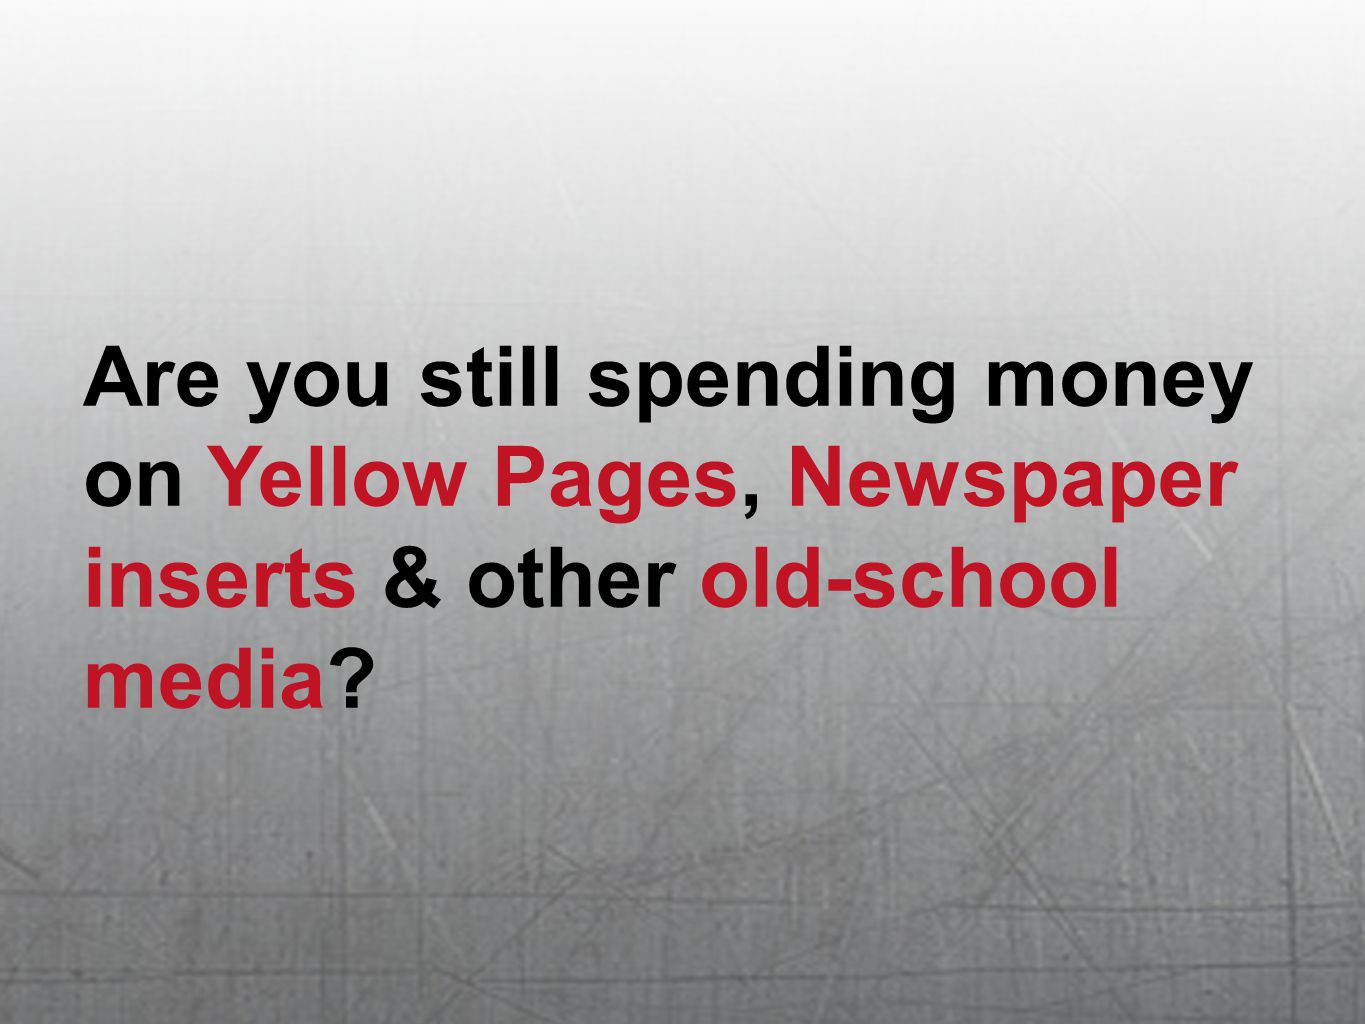 Are you still spending money on Yellow Pages, Newspaper inserts & other old-school media